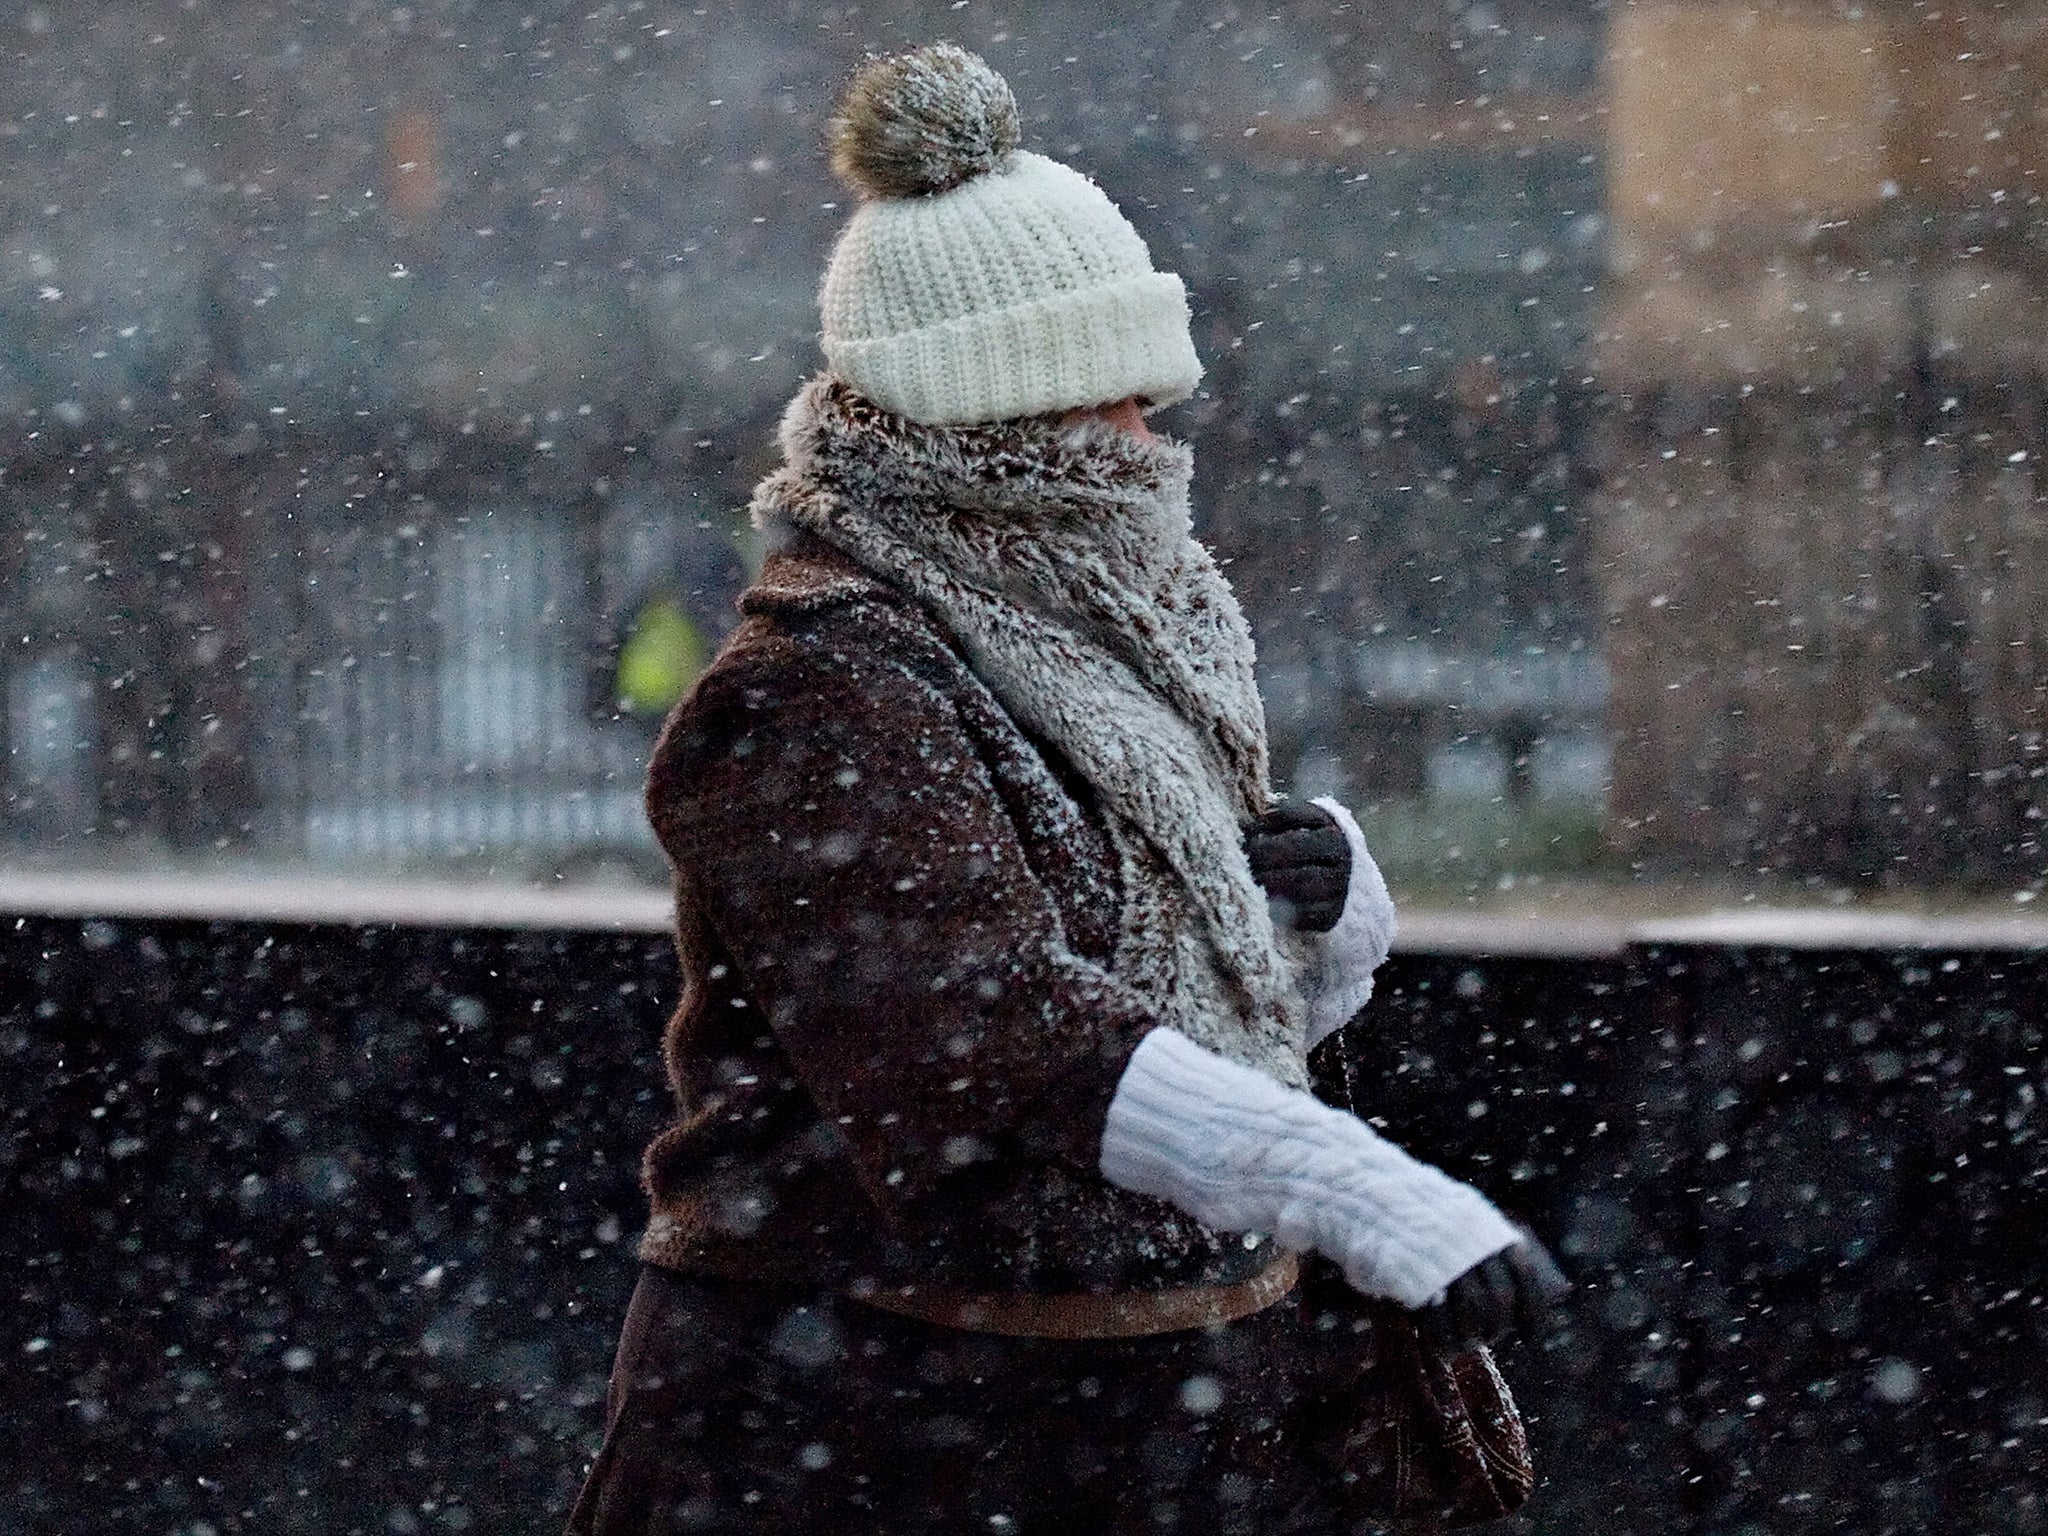 No snow is predicted for Christmas by the Met Office this year